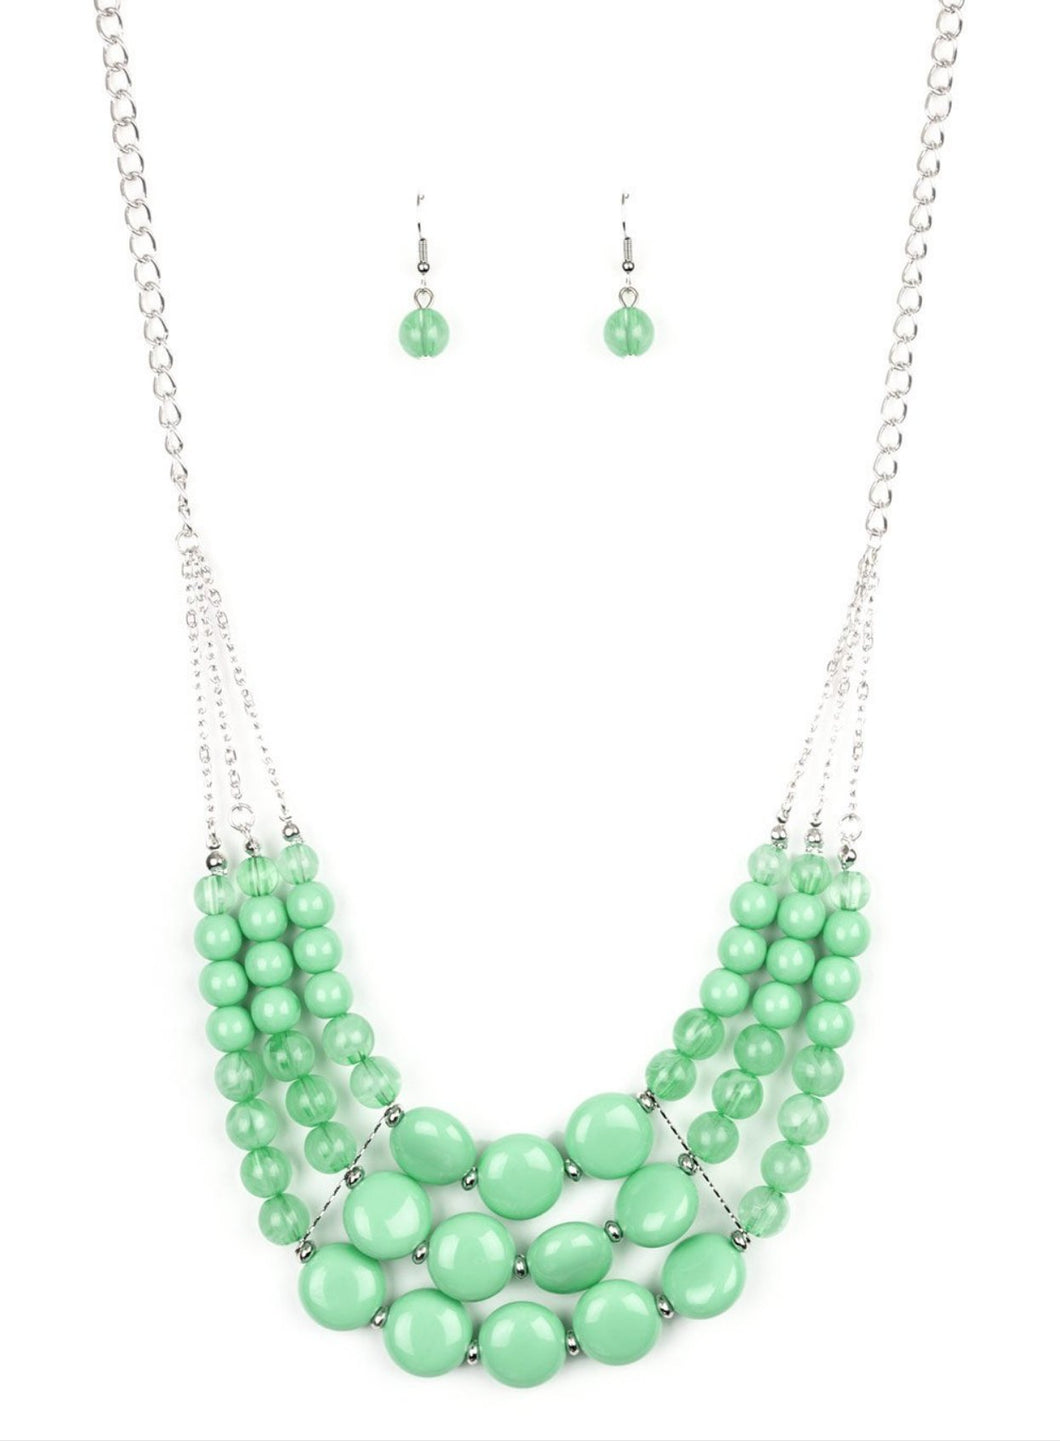 Flirtatiously Fruity Green Necklace and Earrings